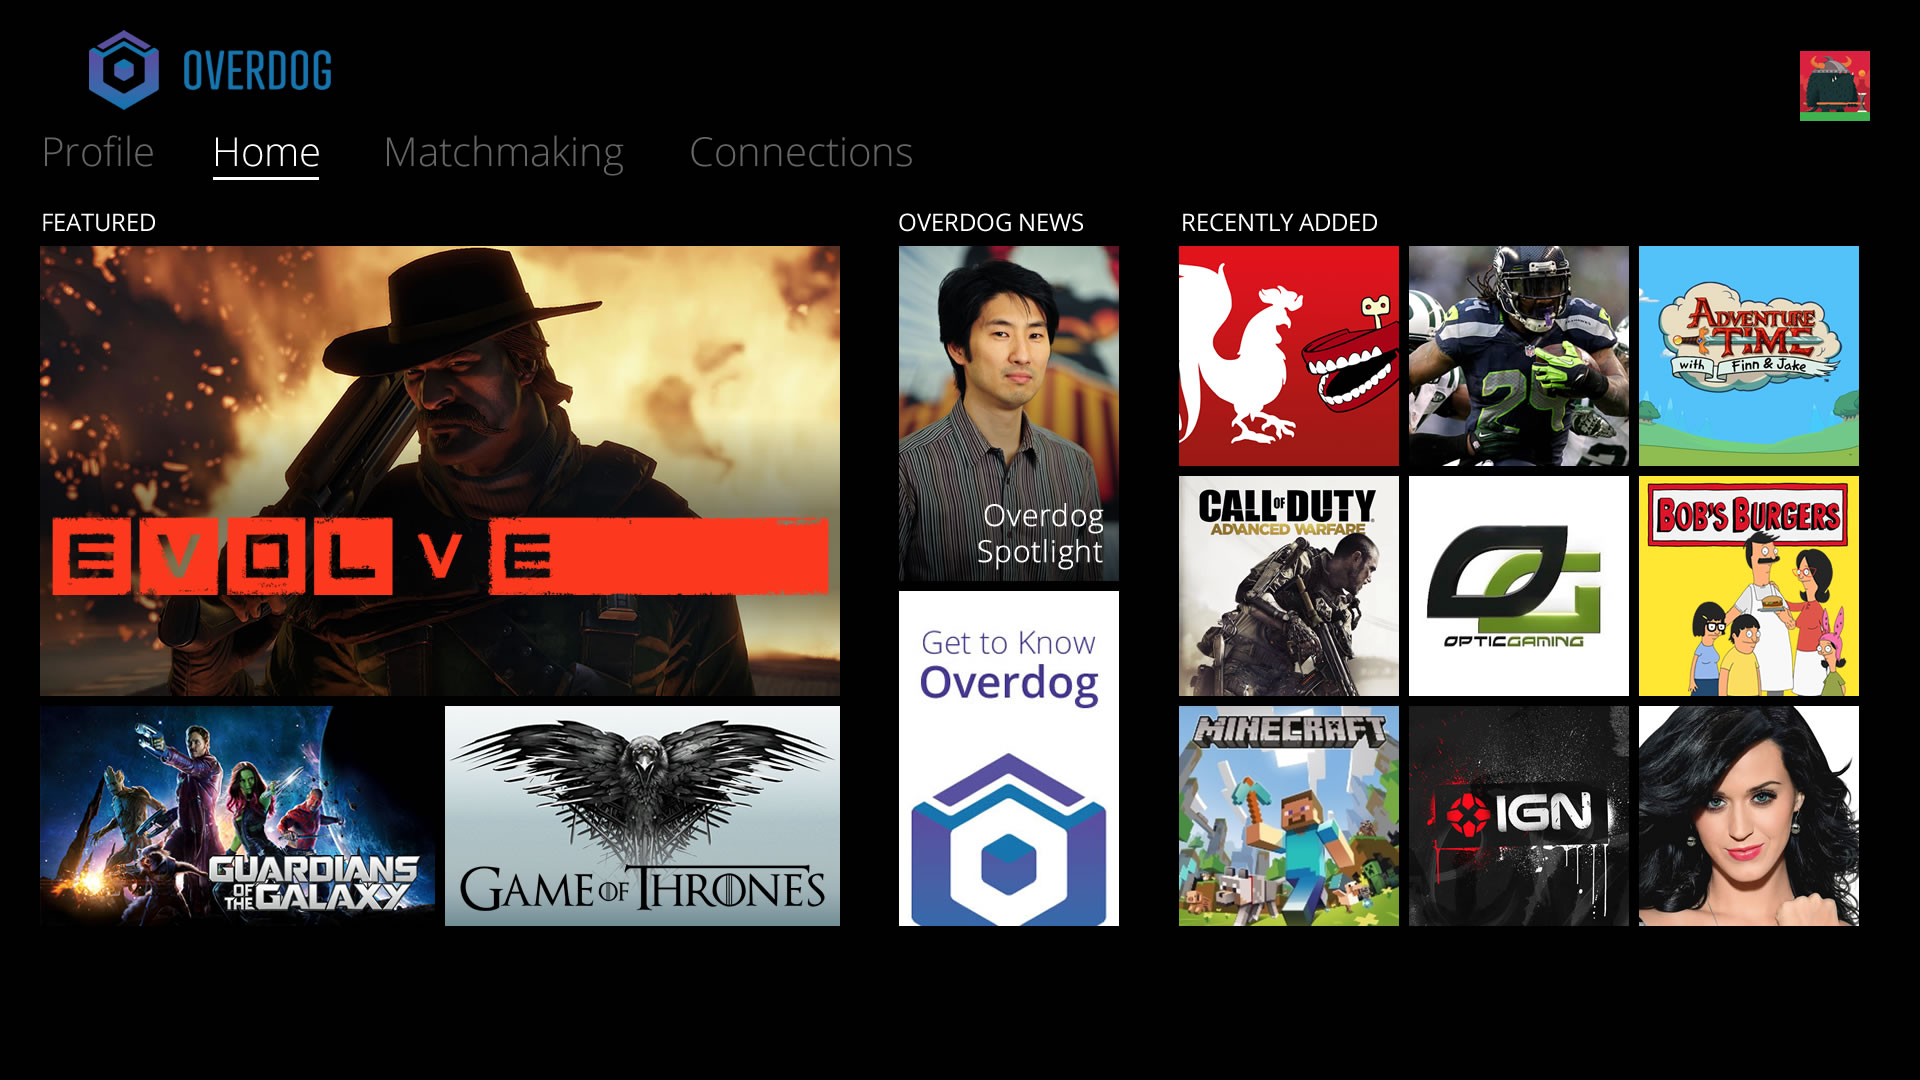 Overdog Launches New Interest-Based Matchmaking for Xbox One